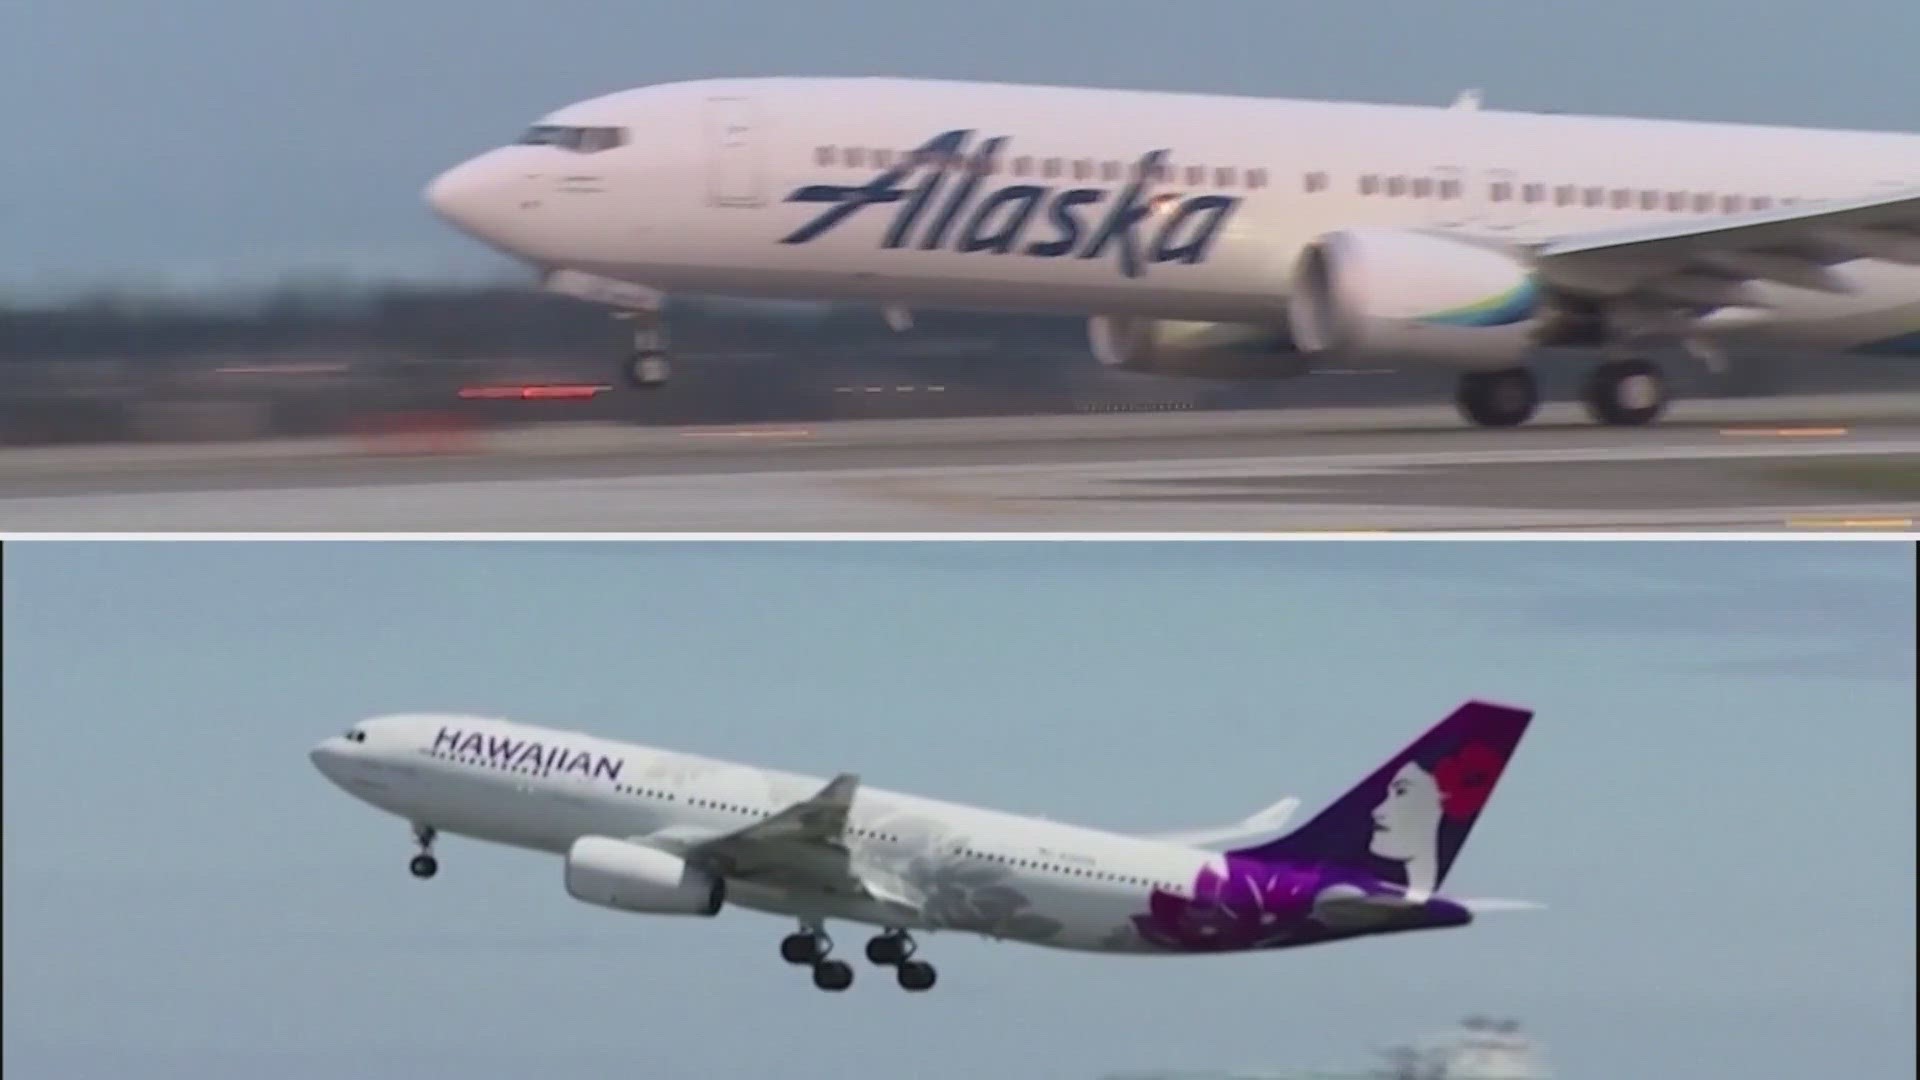 If a merger goes through, Alaska Airlines could get even bigger in Seattle.